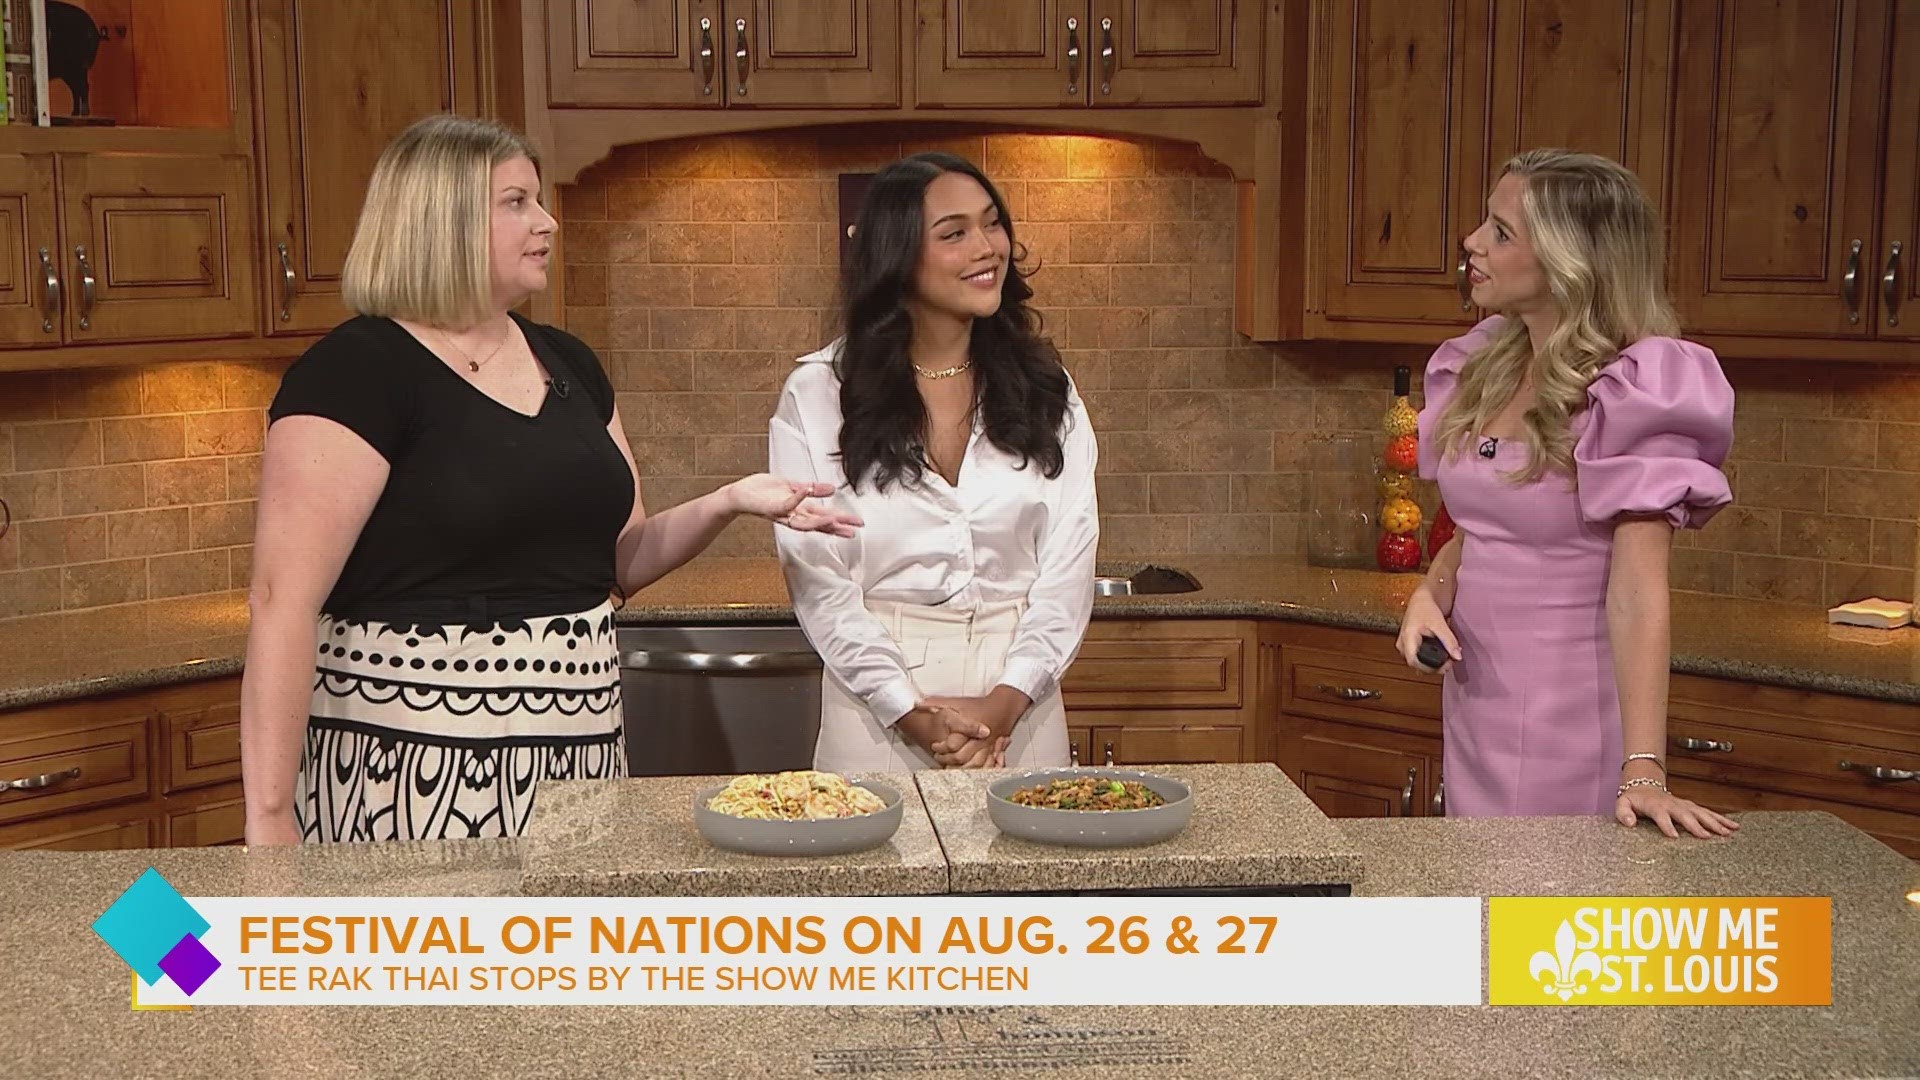 Tee Rak Thai stops by Show Me St. Louis to share what cuisine festival goers can enjoy.